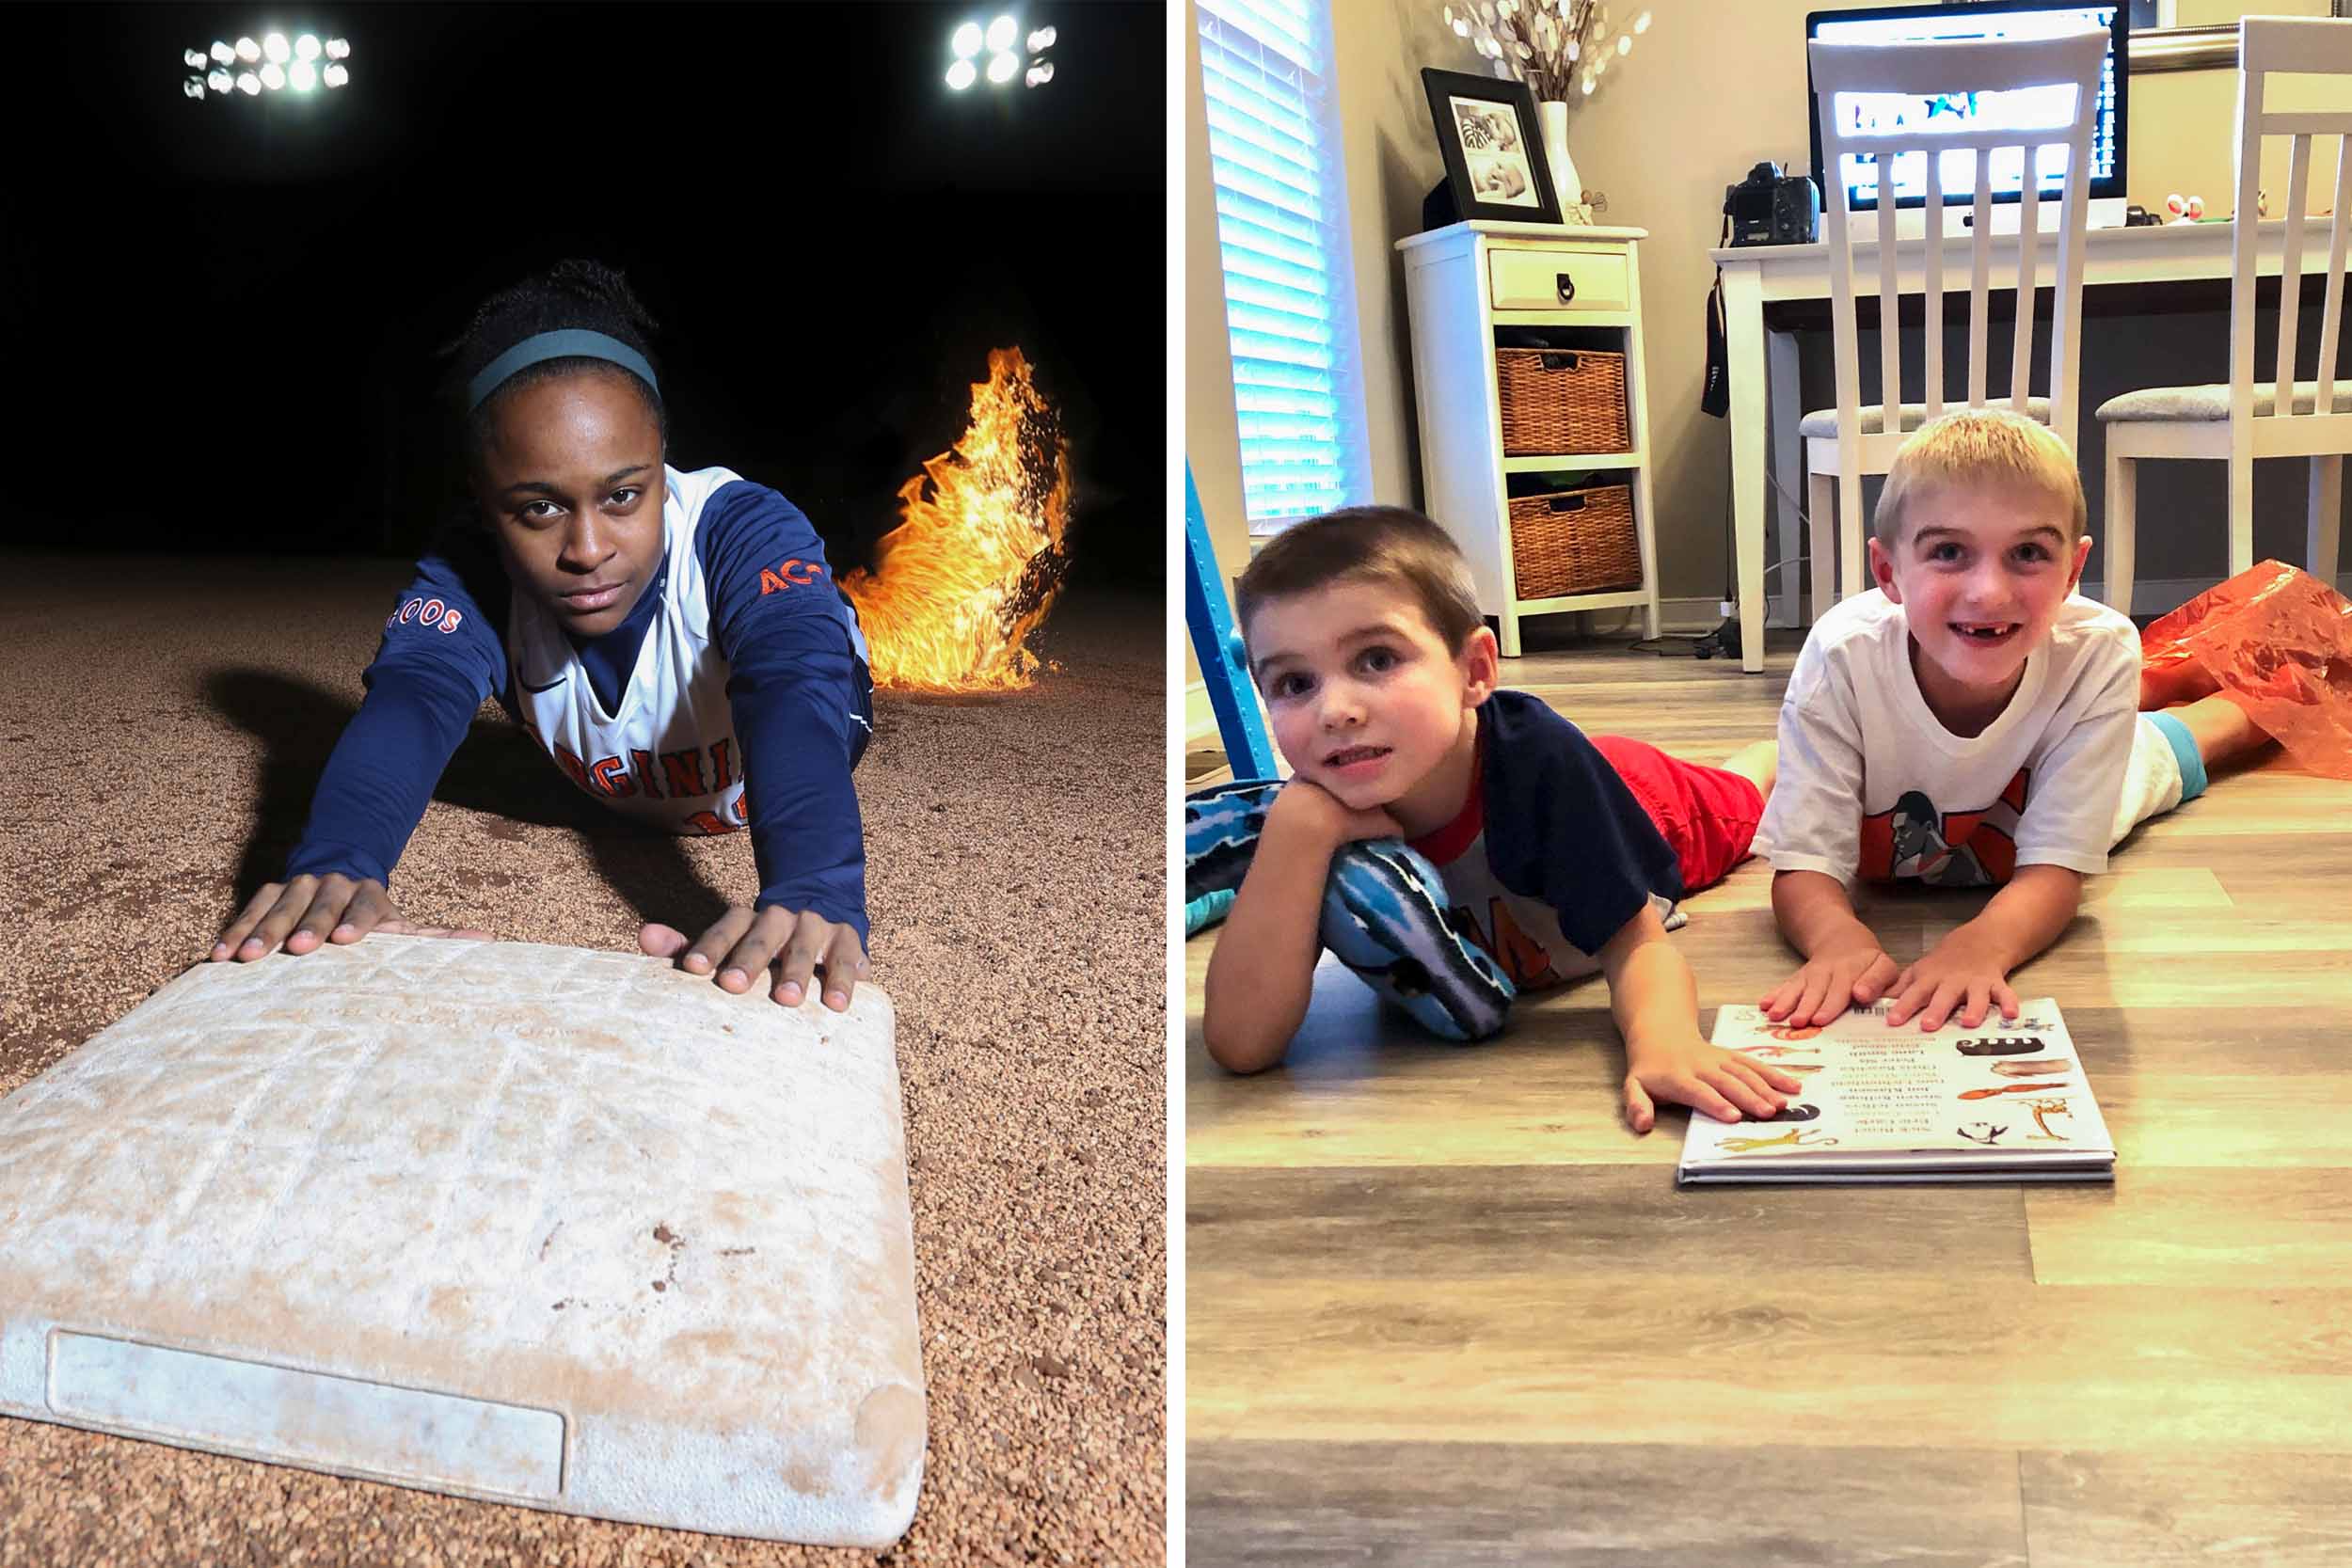 left: UVA softball player touching base with hands after a slide.  right: two little boys touching a fake baseball plate with their hands after sliding into it.